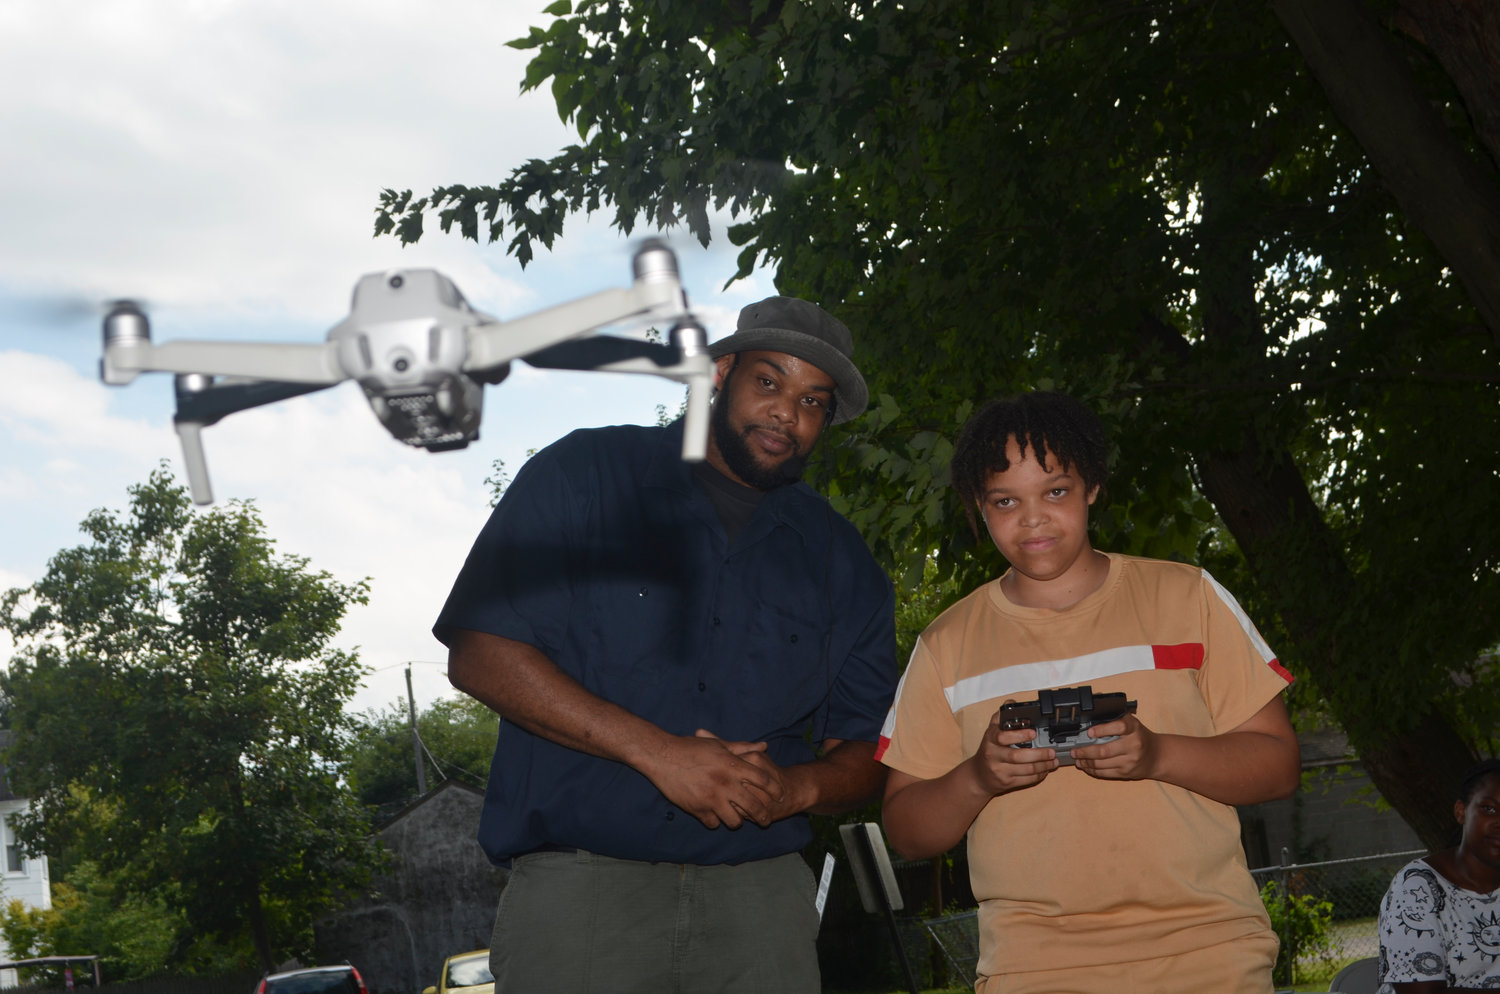 Antoine McLean teaches kids in the program — including his son, Antoine Jr. — how to handle and operate drones safely.